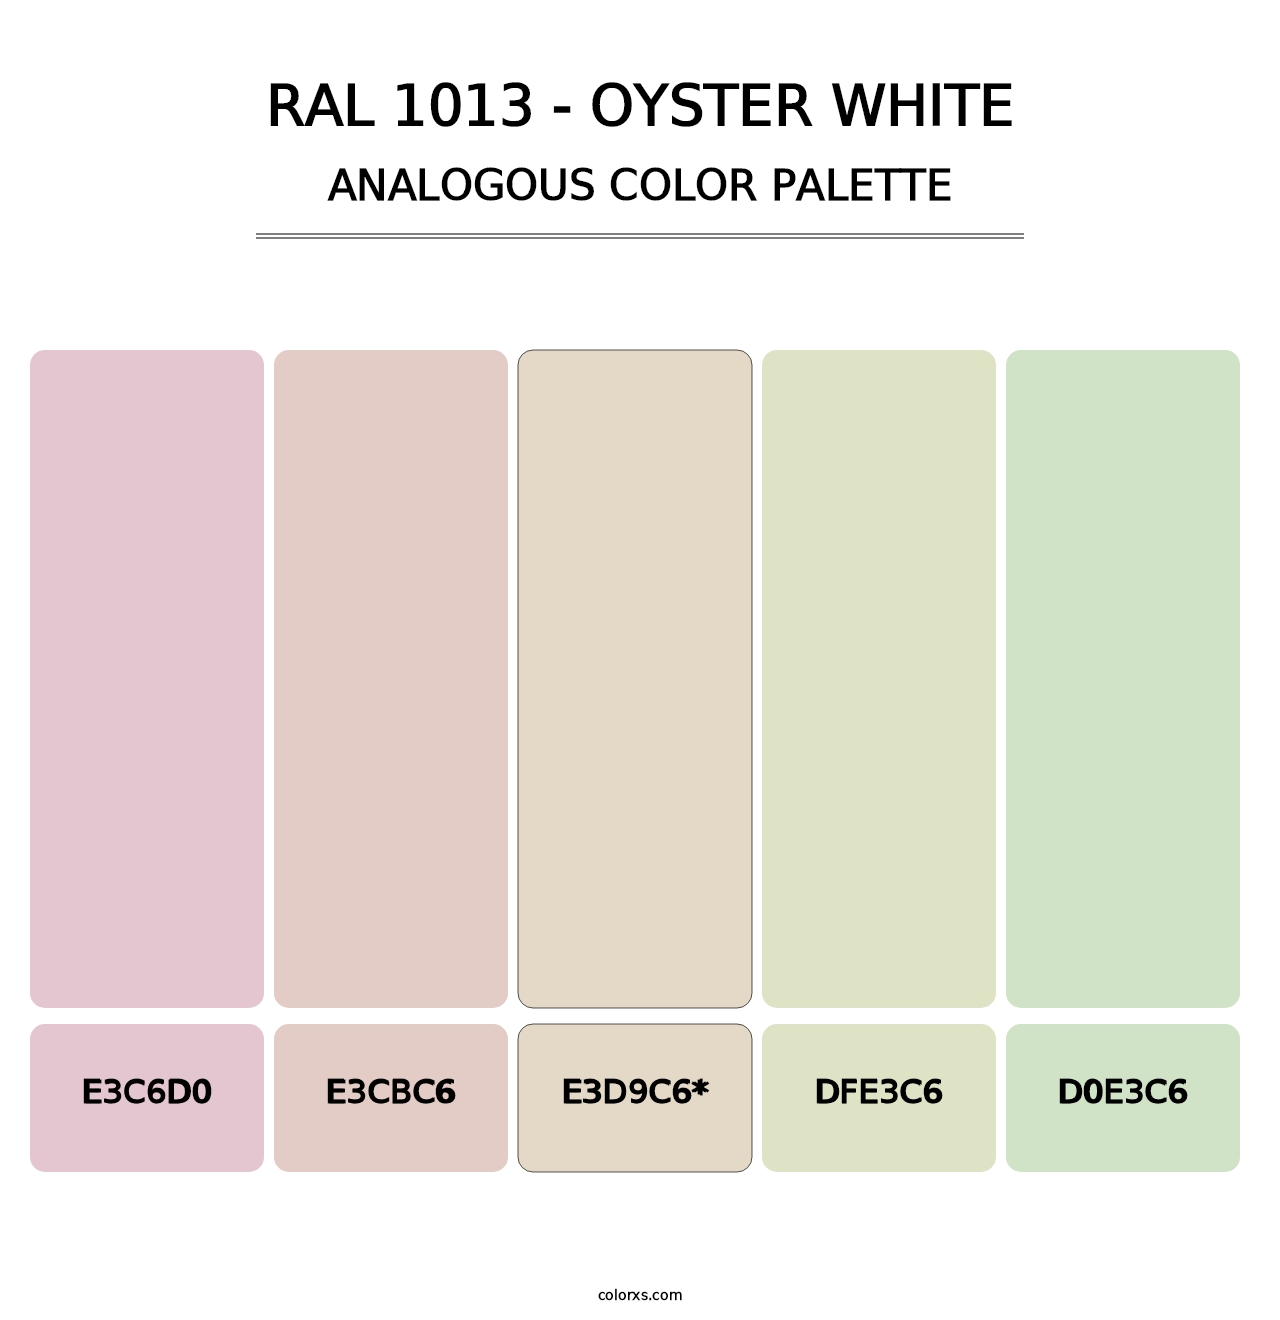 RAL 1013 - Oyster White - Analogous Color Palette